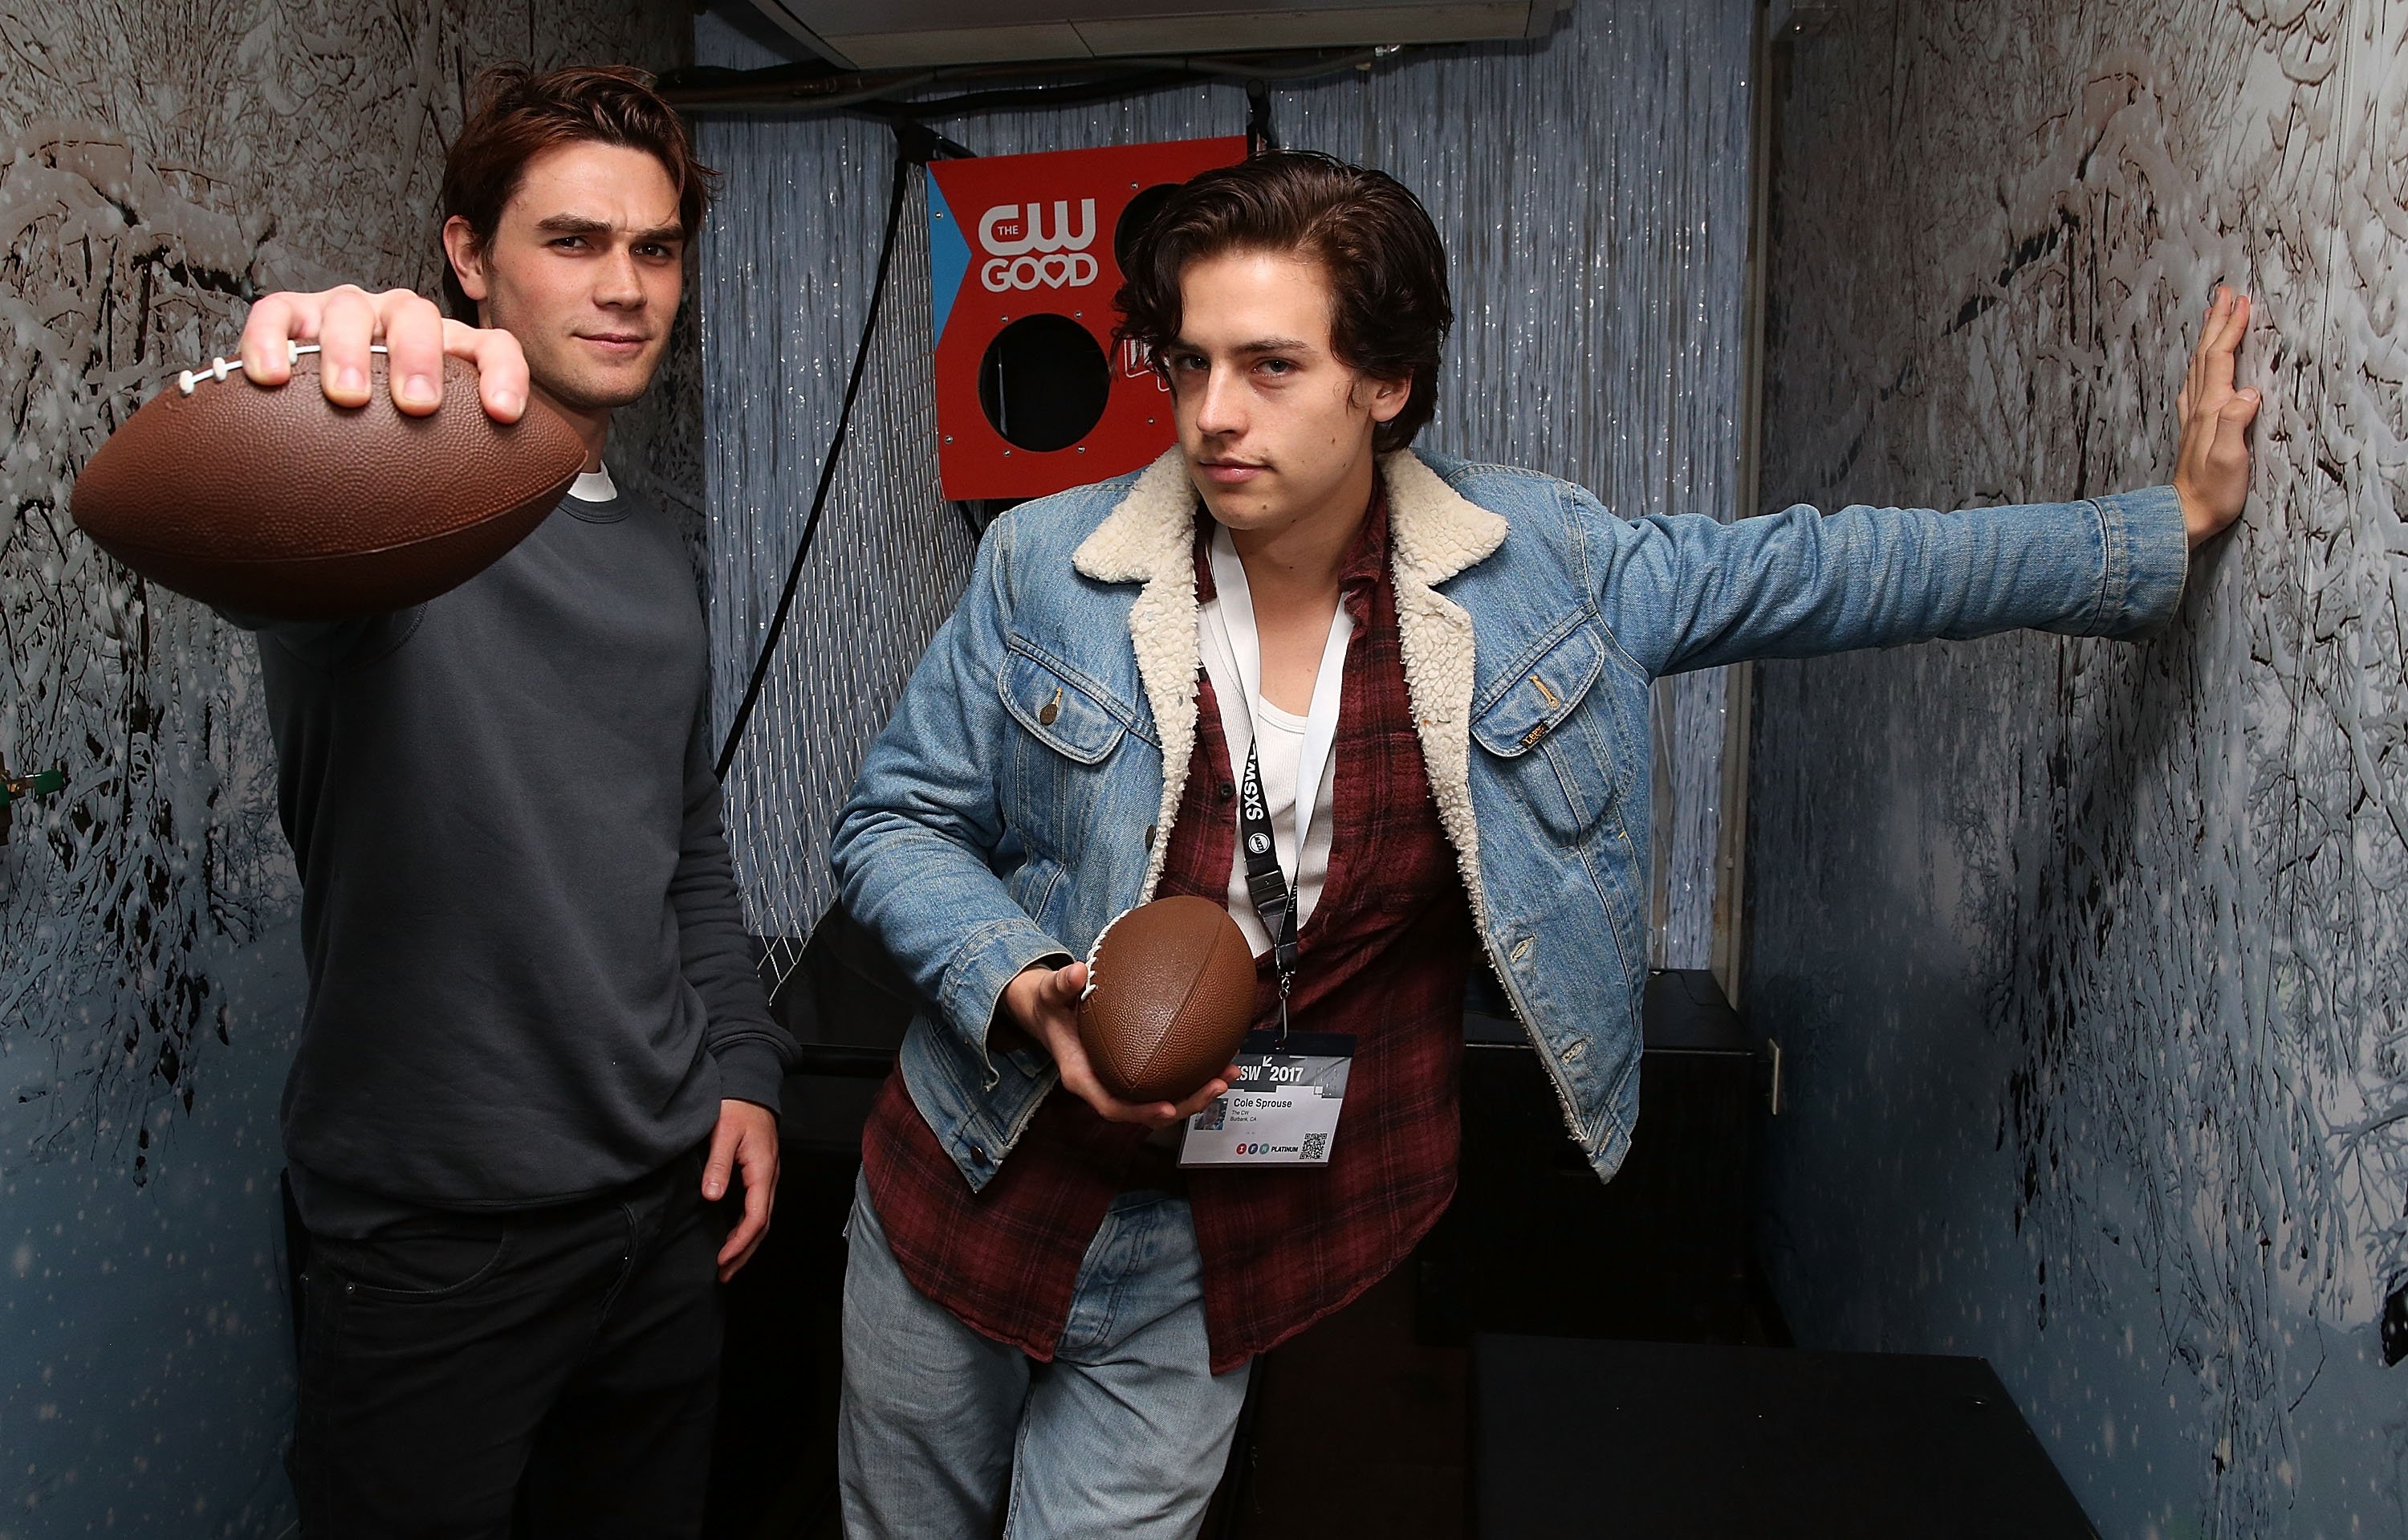 K.J. Apa vs. Cole Sprouse: Which ‘Riverdale’ Star is Worth More?